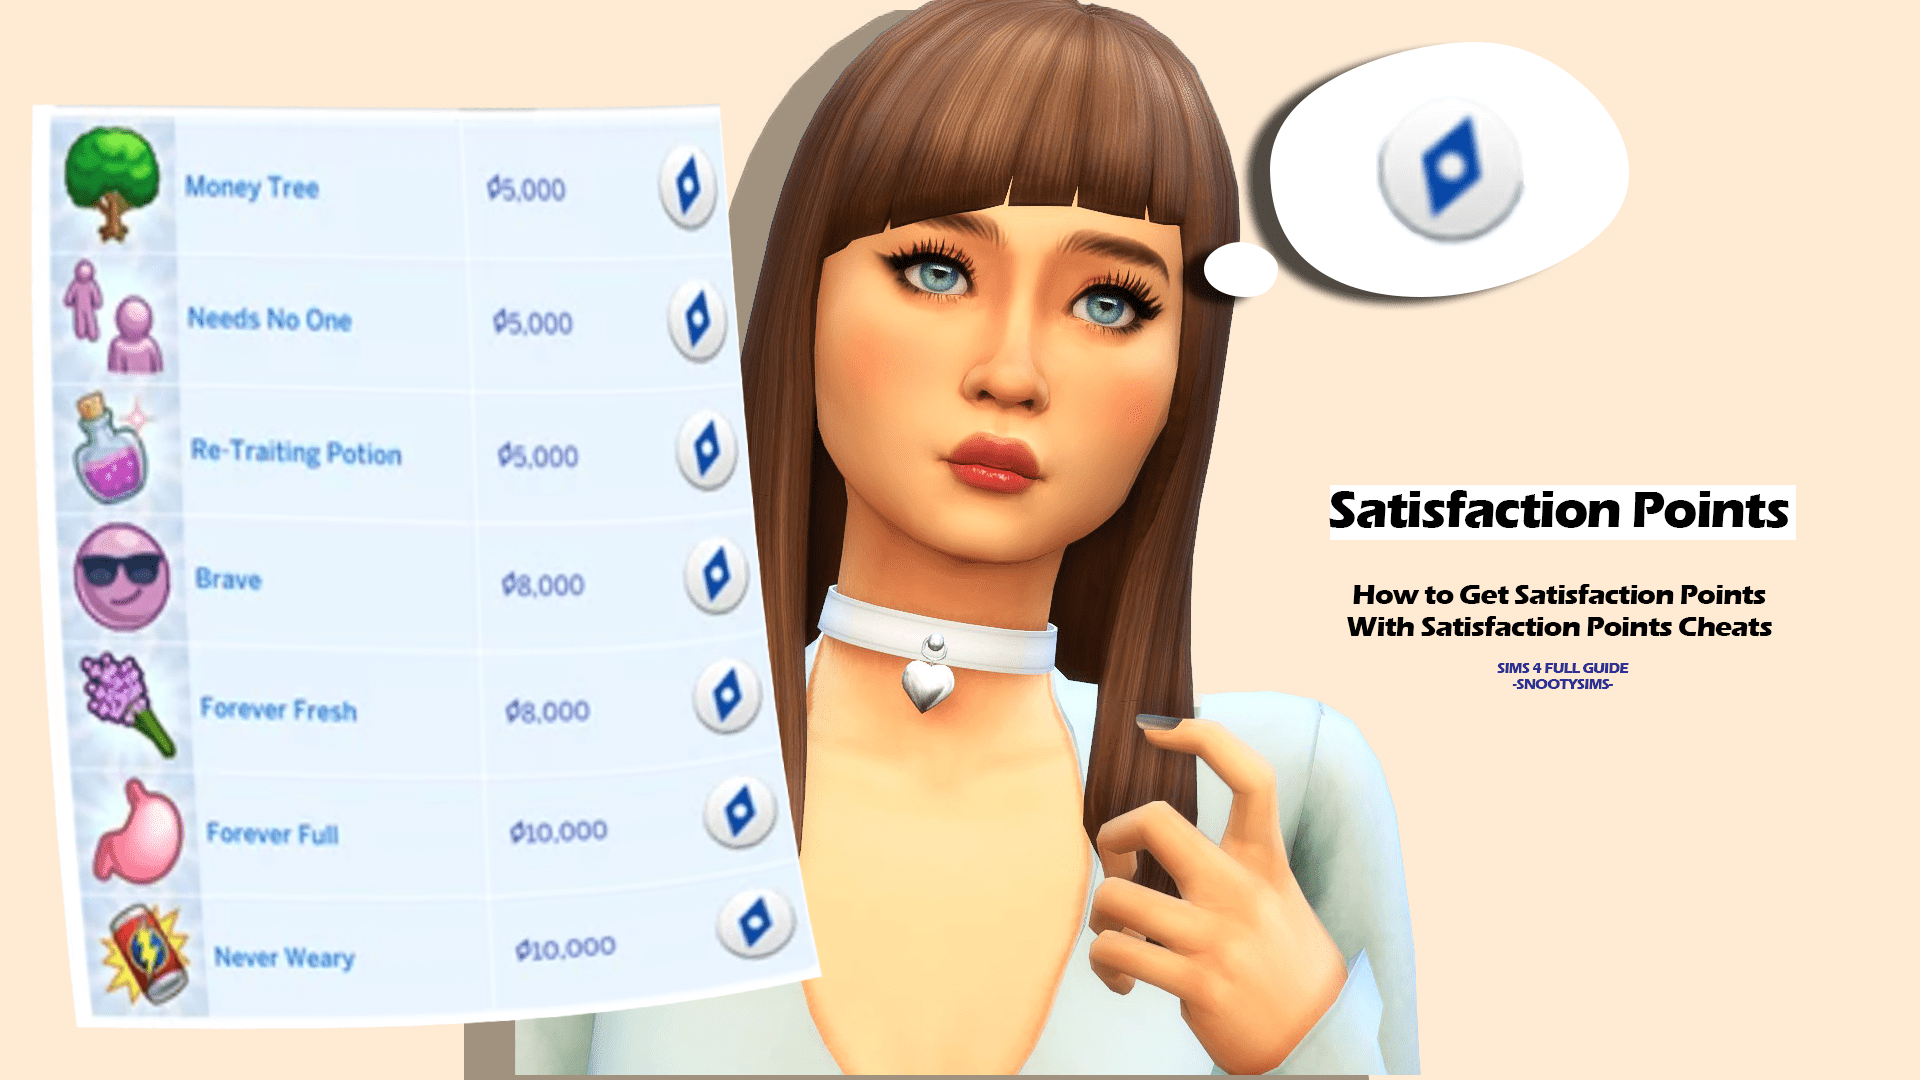 Sims 4 Satisfaction Points Cheats Free Rewards & Satisfaction Points